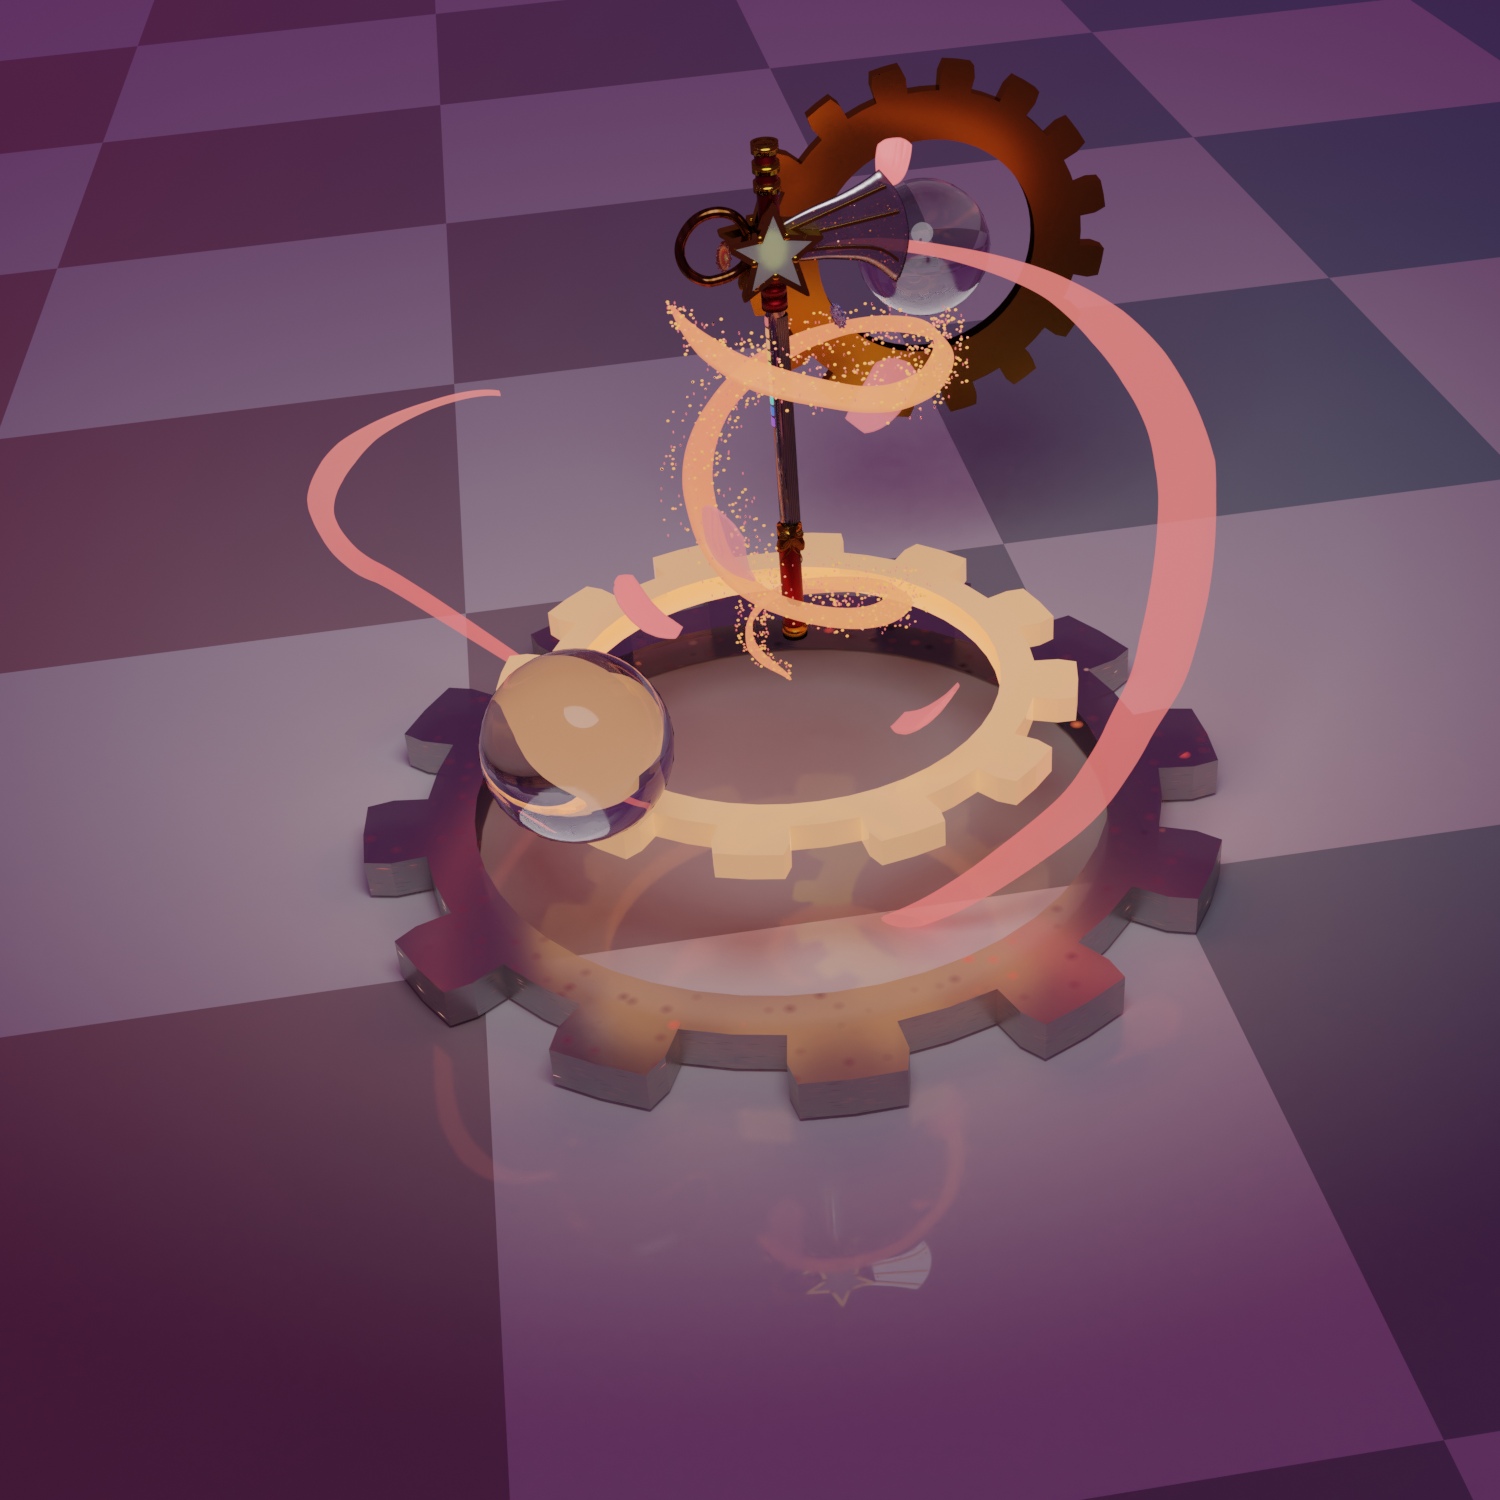 Image description:A finished render showing the Vega weapon surrounded by glowing streams against a purple sky. Some gears and glass spheres were added and reflect off of each other and the lighting. The floor is a reflected checkerboard pattern and the other objects are reflected in it.